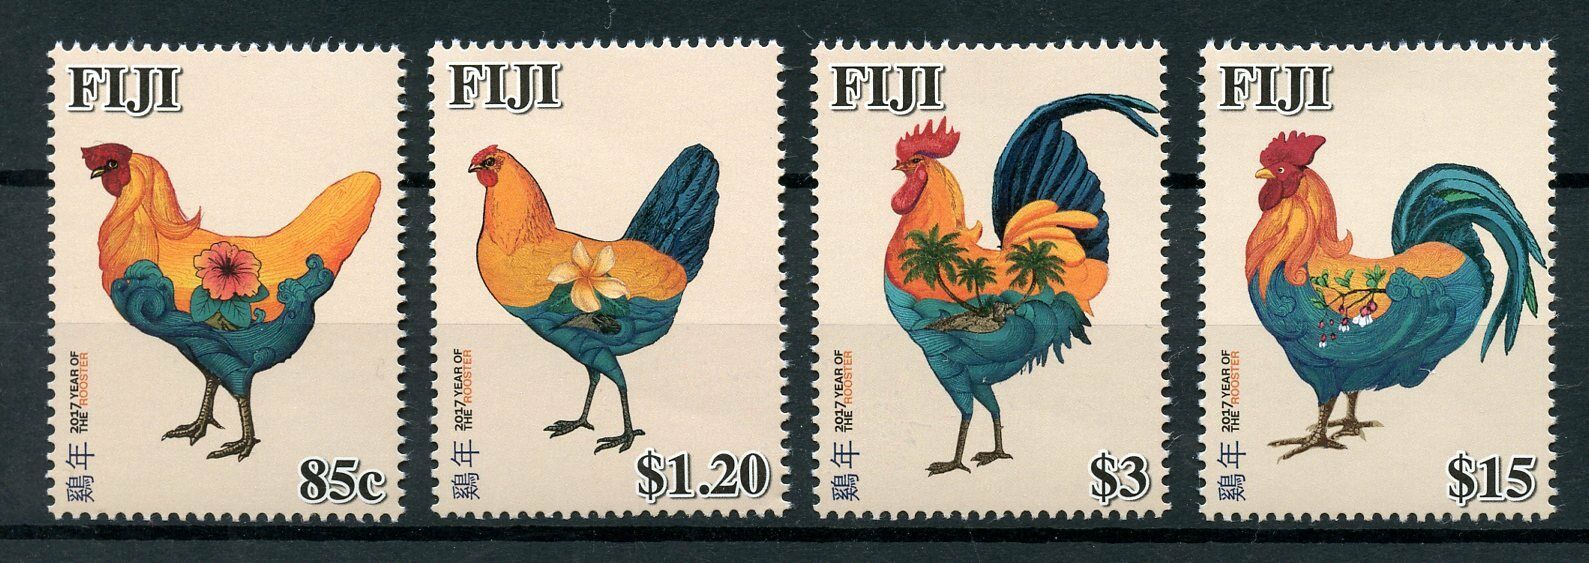 Fiji 2017 MNH Year of Rooster Stamps Chinese Lunar New Year 4v Set